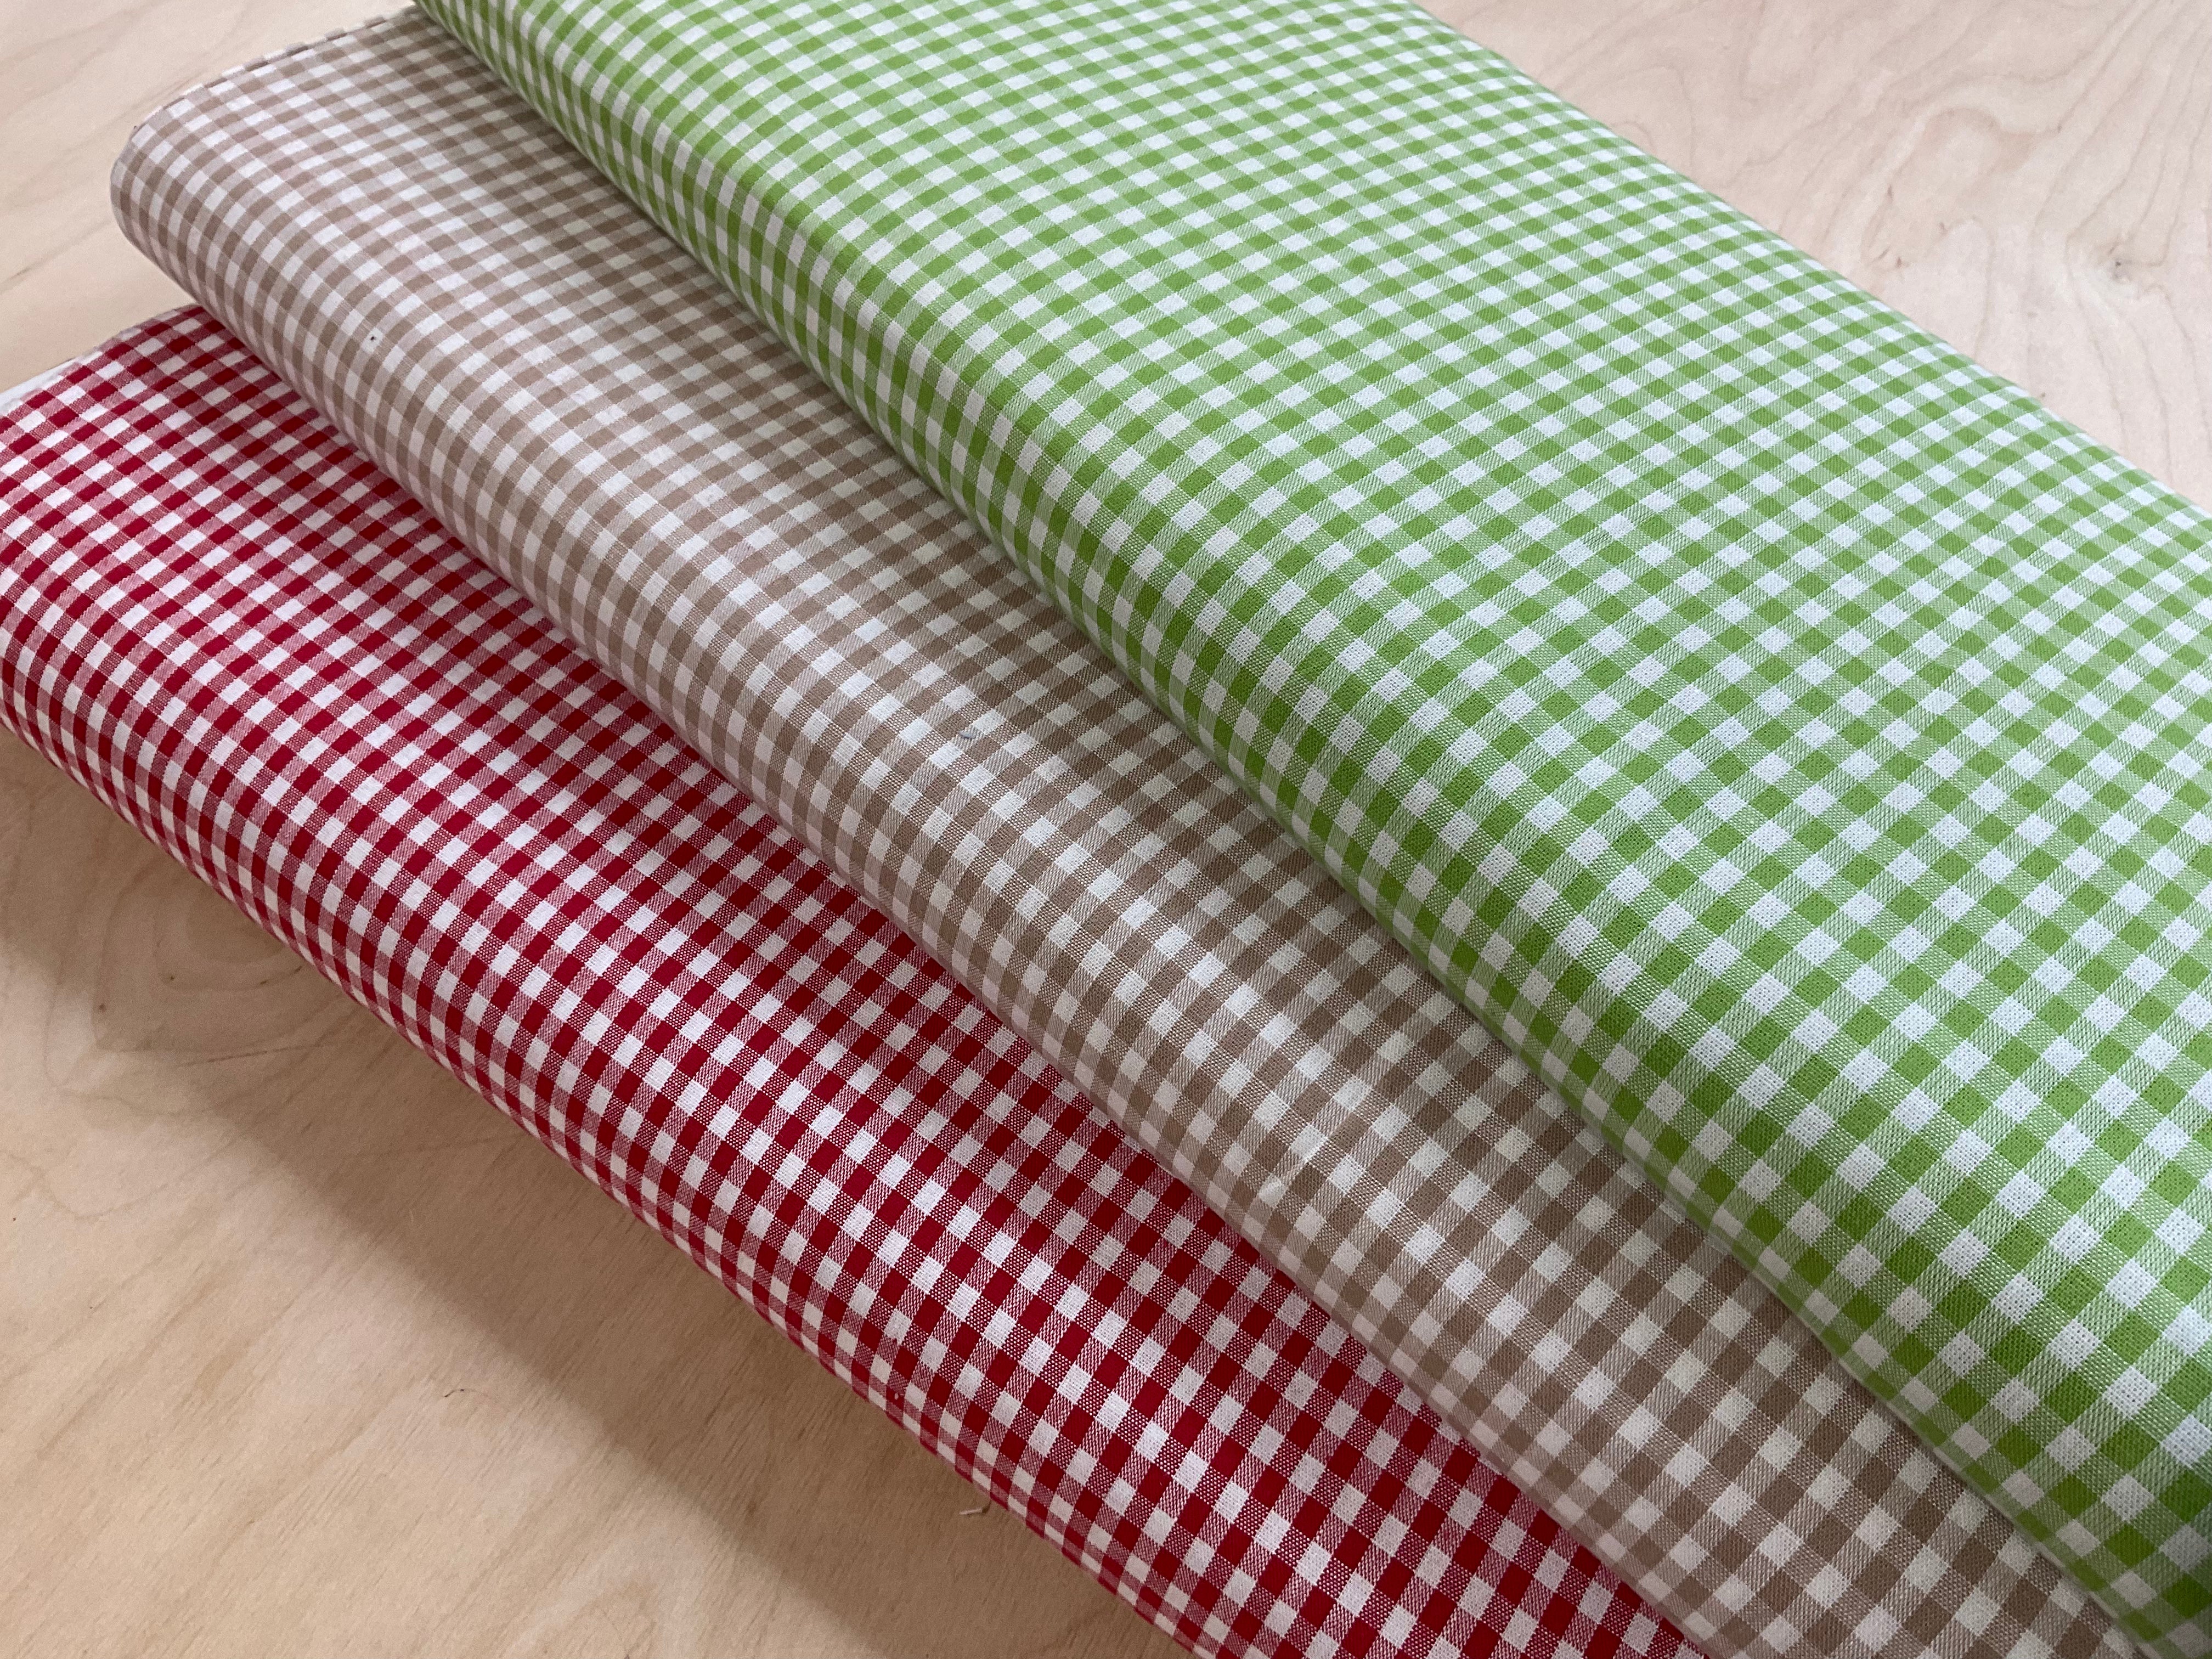 Small Gingham Print Cotton